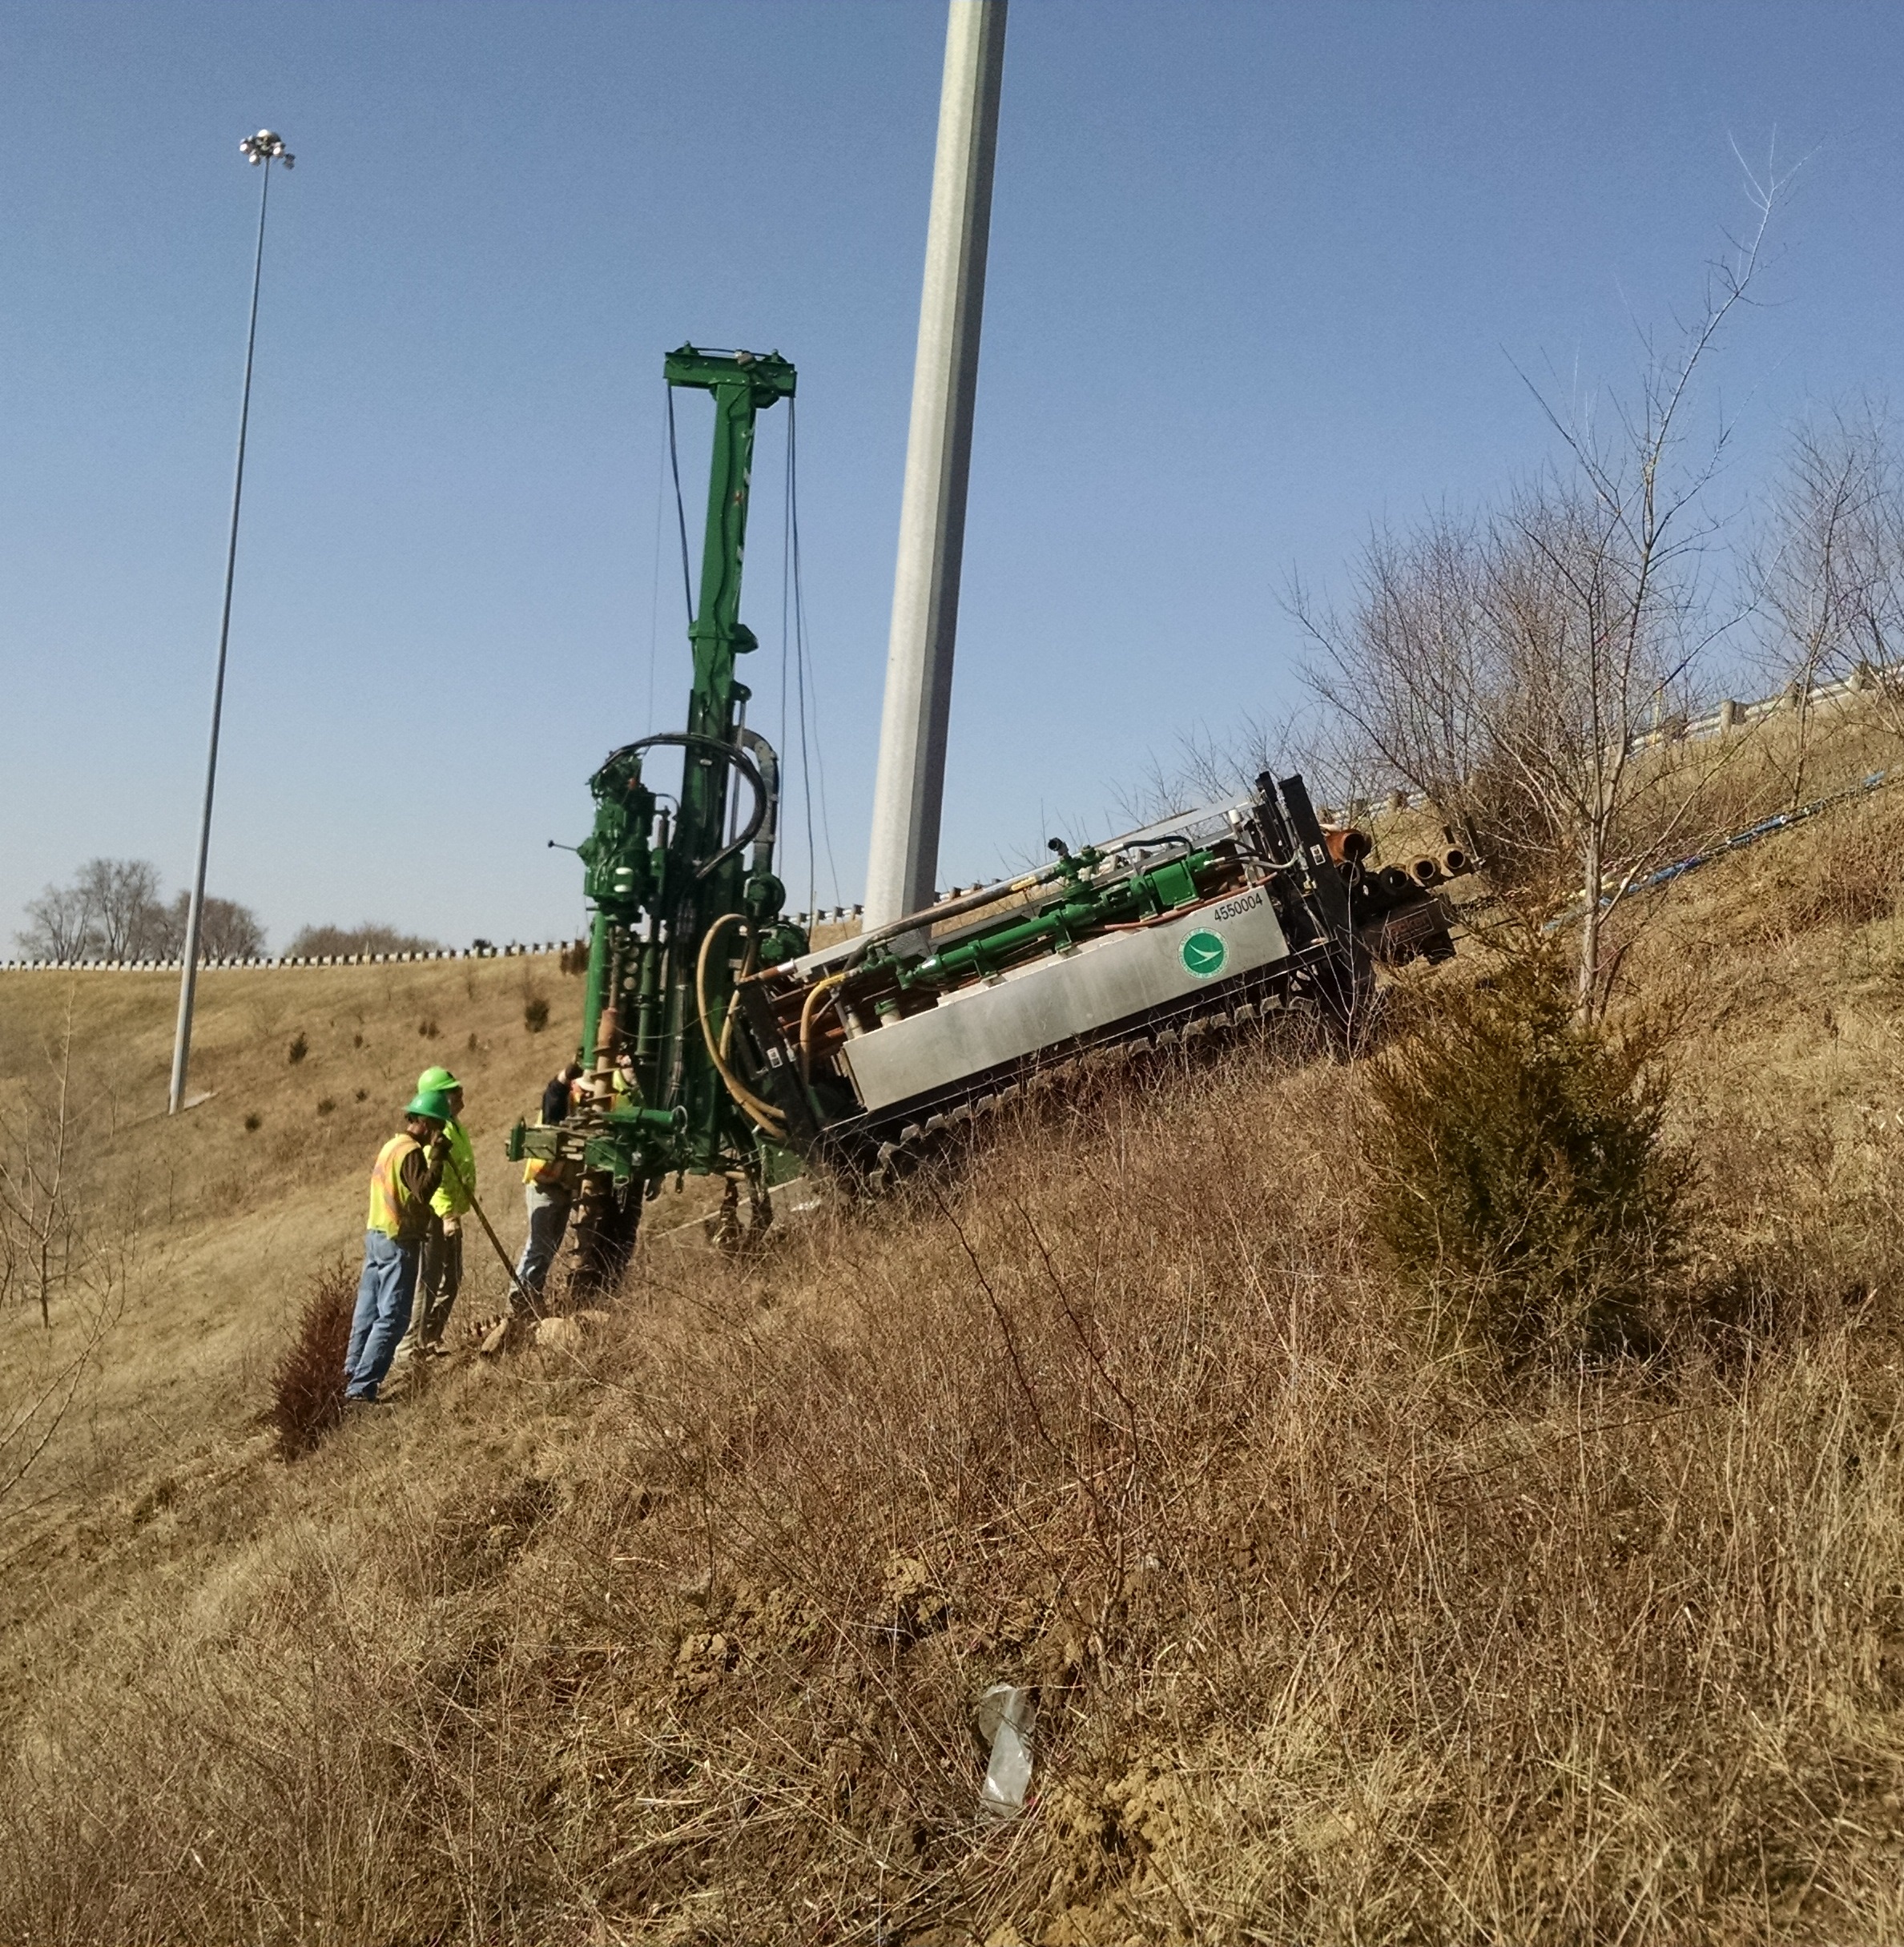 Acker XLS Rig Drilling on Slope